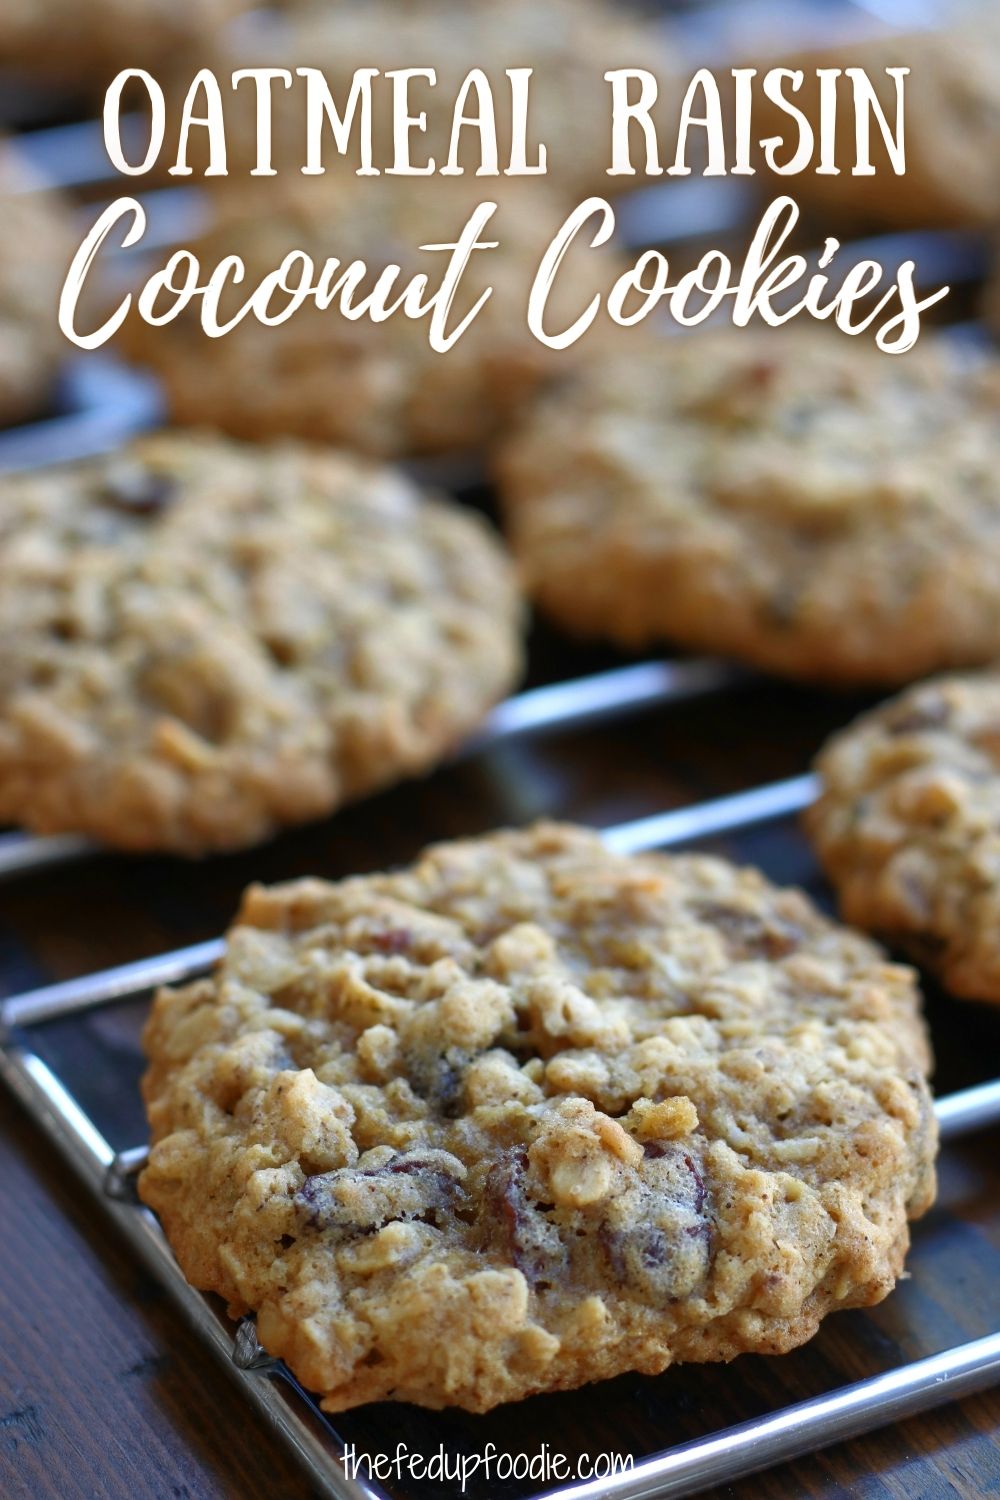 Oatmeal Raisin Coconut Cookies recipe creates a chewy, crispy and flavorful treat that everyone loves. Made with pecans, coconut, old-fashioned rolled oats and cinnamon. Such an easy cookie that is so very satisfying.
#oatmealCookies #OatmealRaisinCookies #HomemadeOatmealCookies #OatAndRaisinCookies #OatmealRaisinCoconutCookies #OatmealRaisinCoconutCookiesChewy